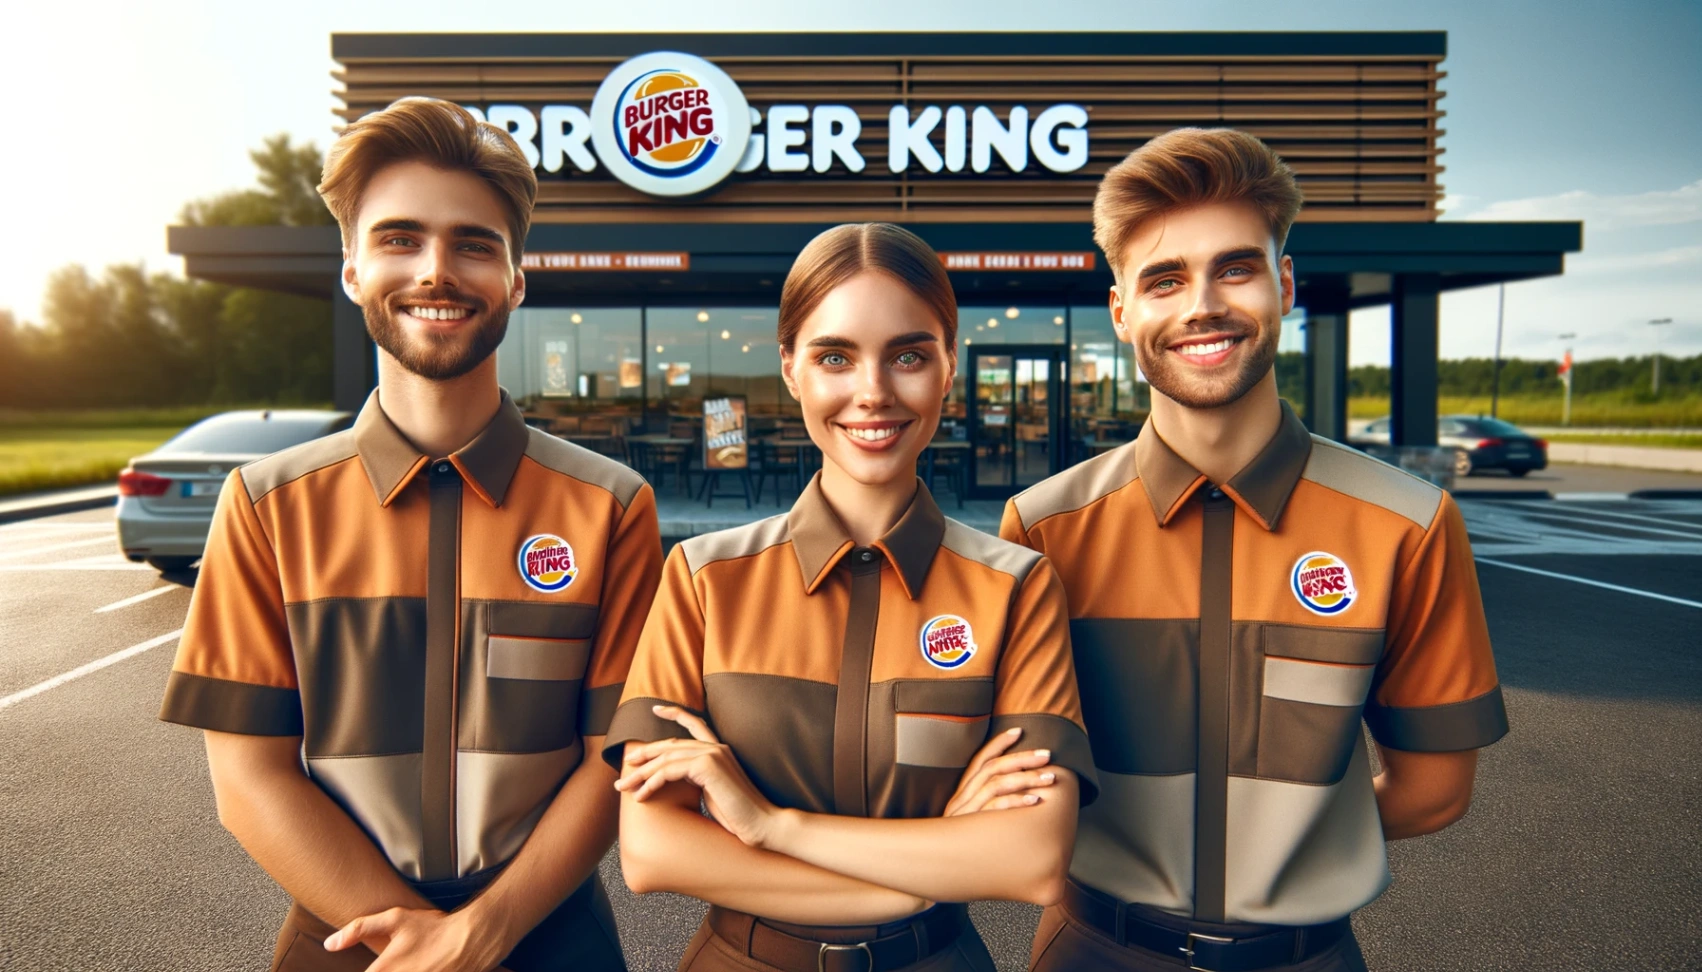 Burger King - Learn How to Apply for Positions